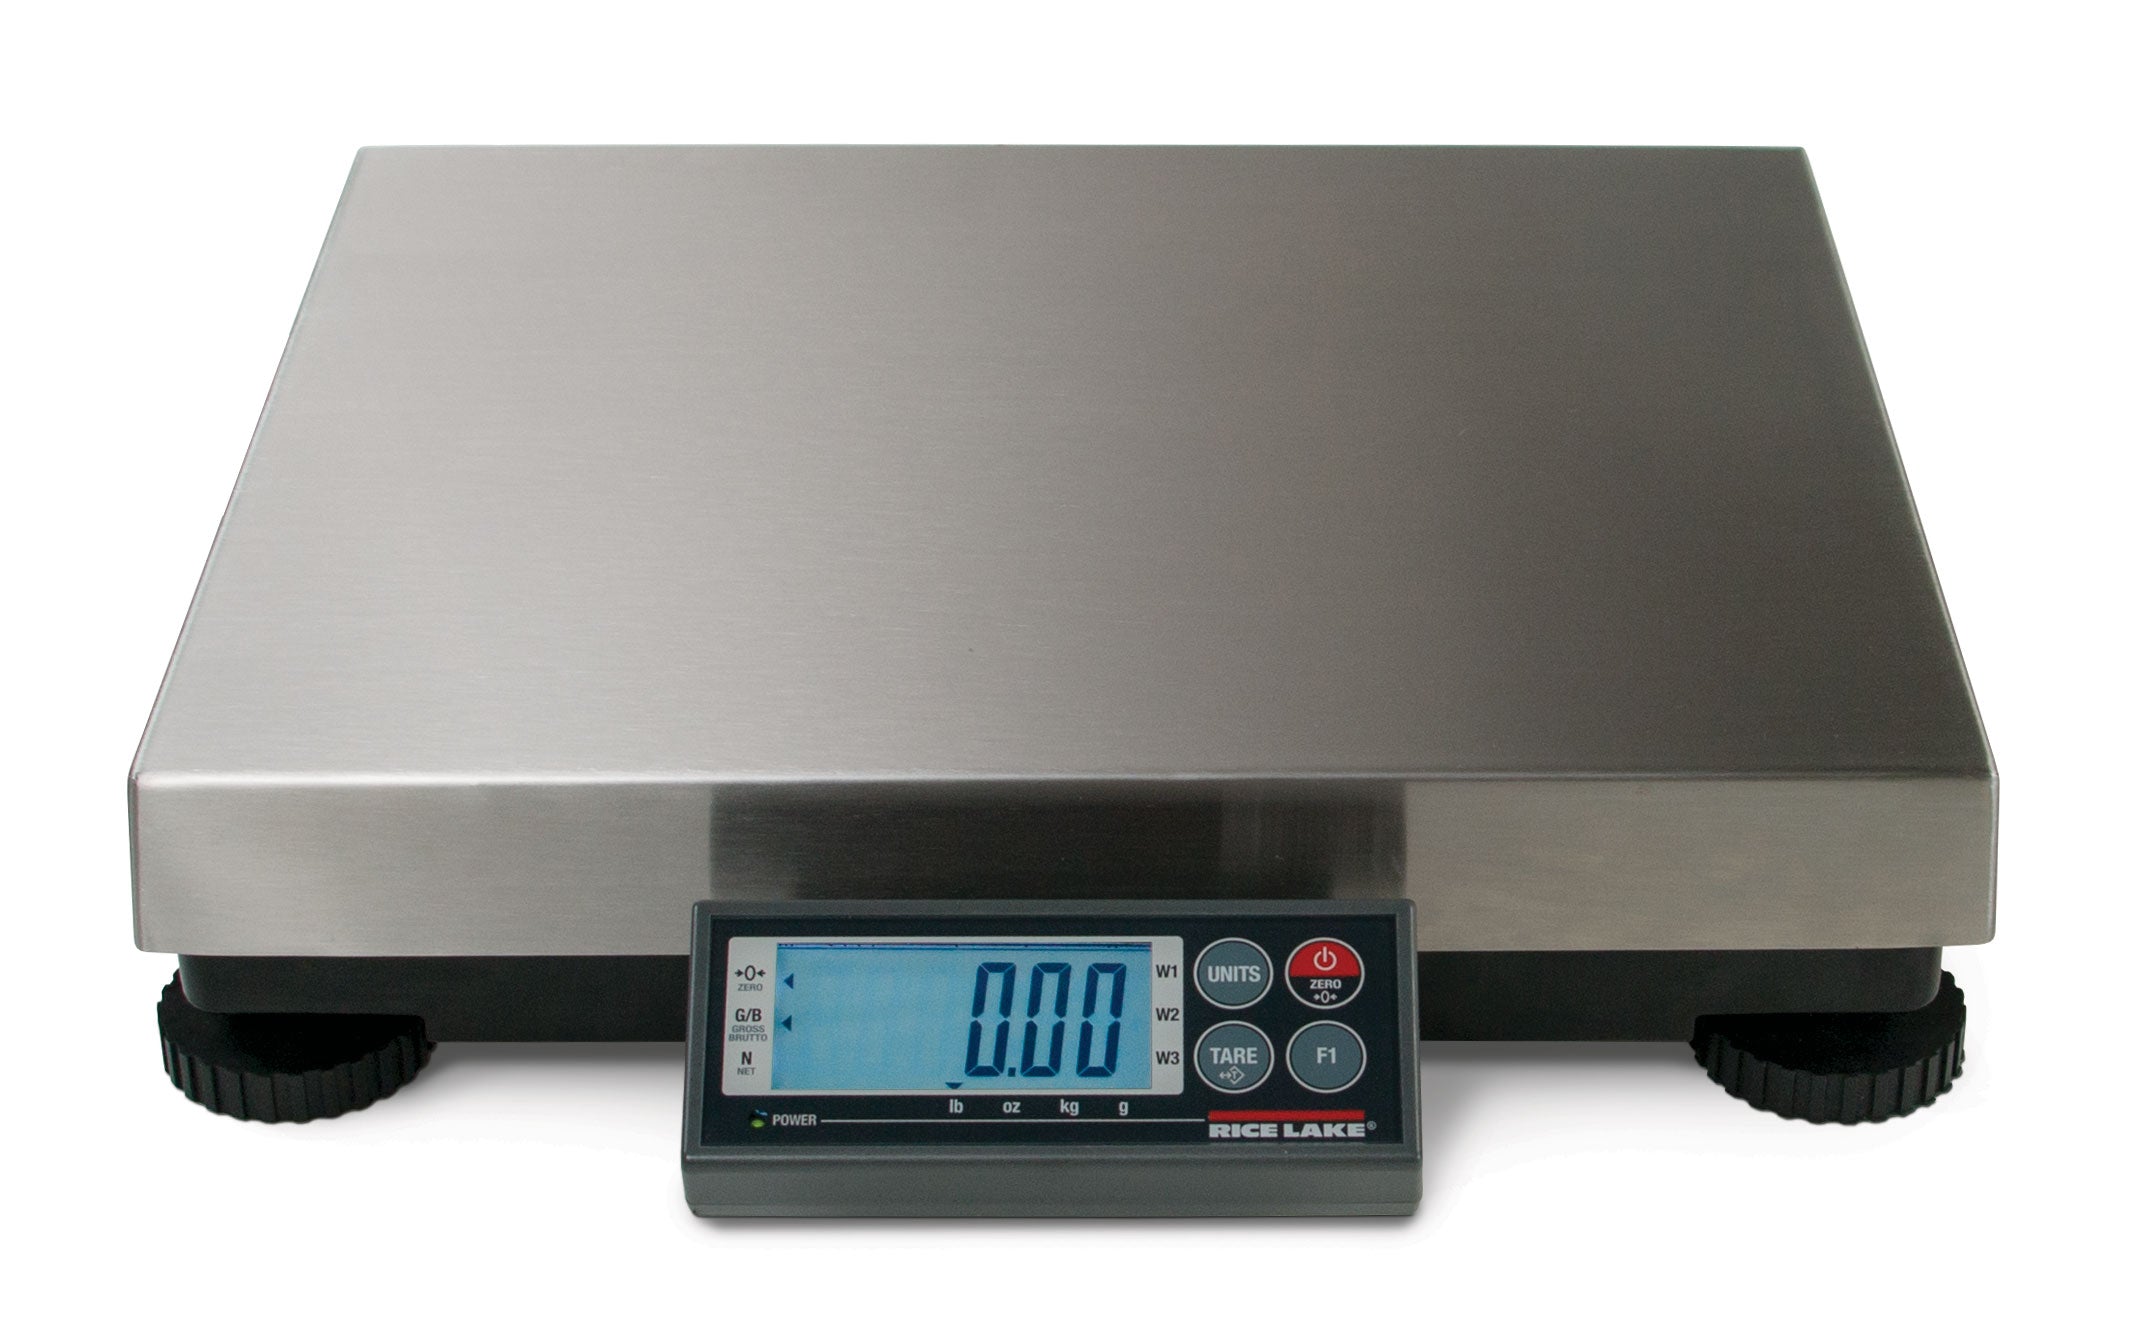 Rice Lake 182399 300 x 0.1 lb/150 x 0.05kg, BP 2424-150S Shipping Digital Scale, SS Weight Platter with 2 years Warranty